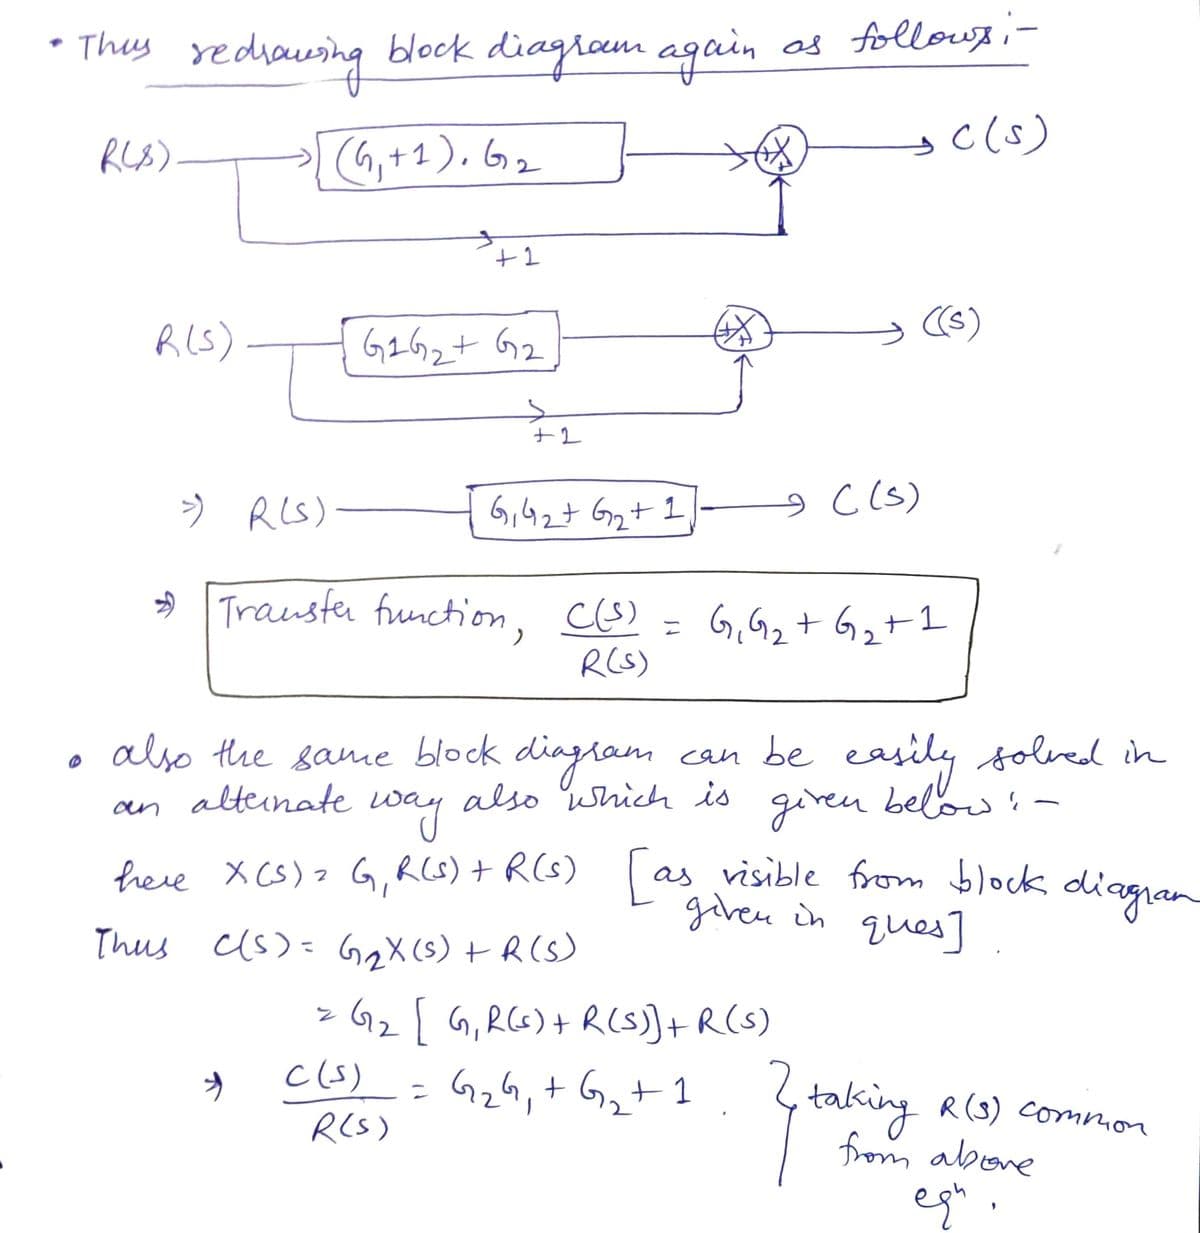 • They rediauing block diagram again
af follows ;-
c(s)
(G,+1), G2
RIS)-
G2G2+ G2
(6)
>» RLS)-
G,42+ G2+ I
c (s)
Trauster function, cG)
G,G2+ G2t
ニ
RCS)
also the same block diagram
also which is
can be easilyfolved in
の
alteinate
given
belowi-
: -
an
here x CS) > G, RCG)+ R(s) as visible from block
given in ques]
diagram
Thus us)= GaX(s) +R(s)
> G2 [ G,RG6)+ R(S))+R(S)
c(s)
-- G24,+ G,+1
RCS)
R(3) Common
taking
from abore
